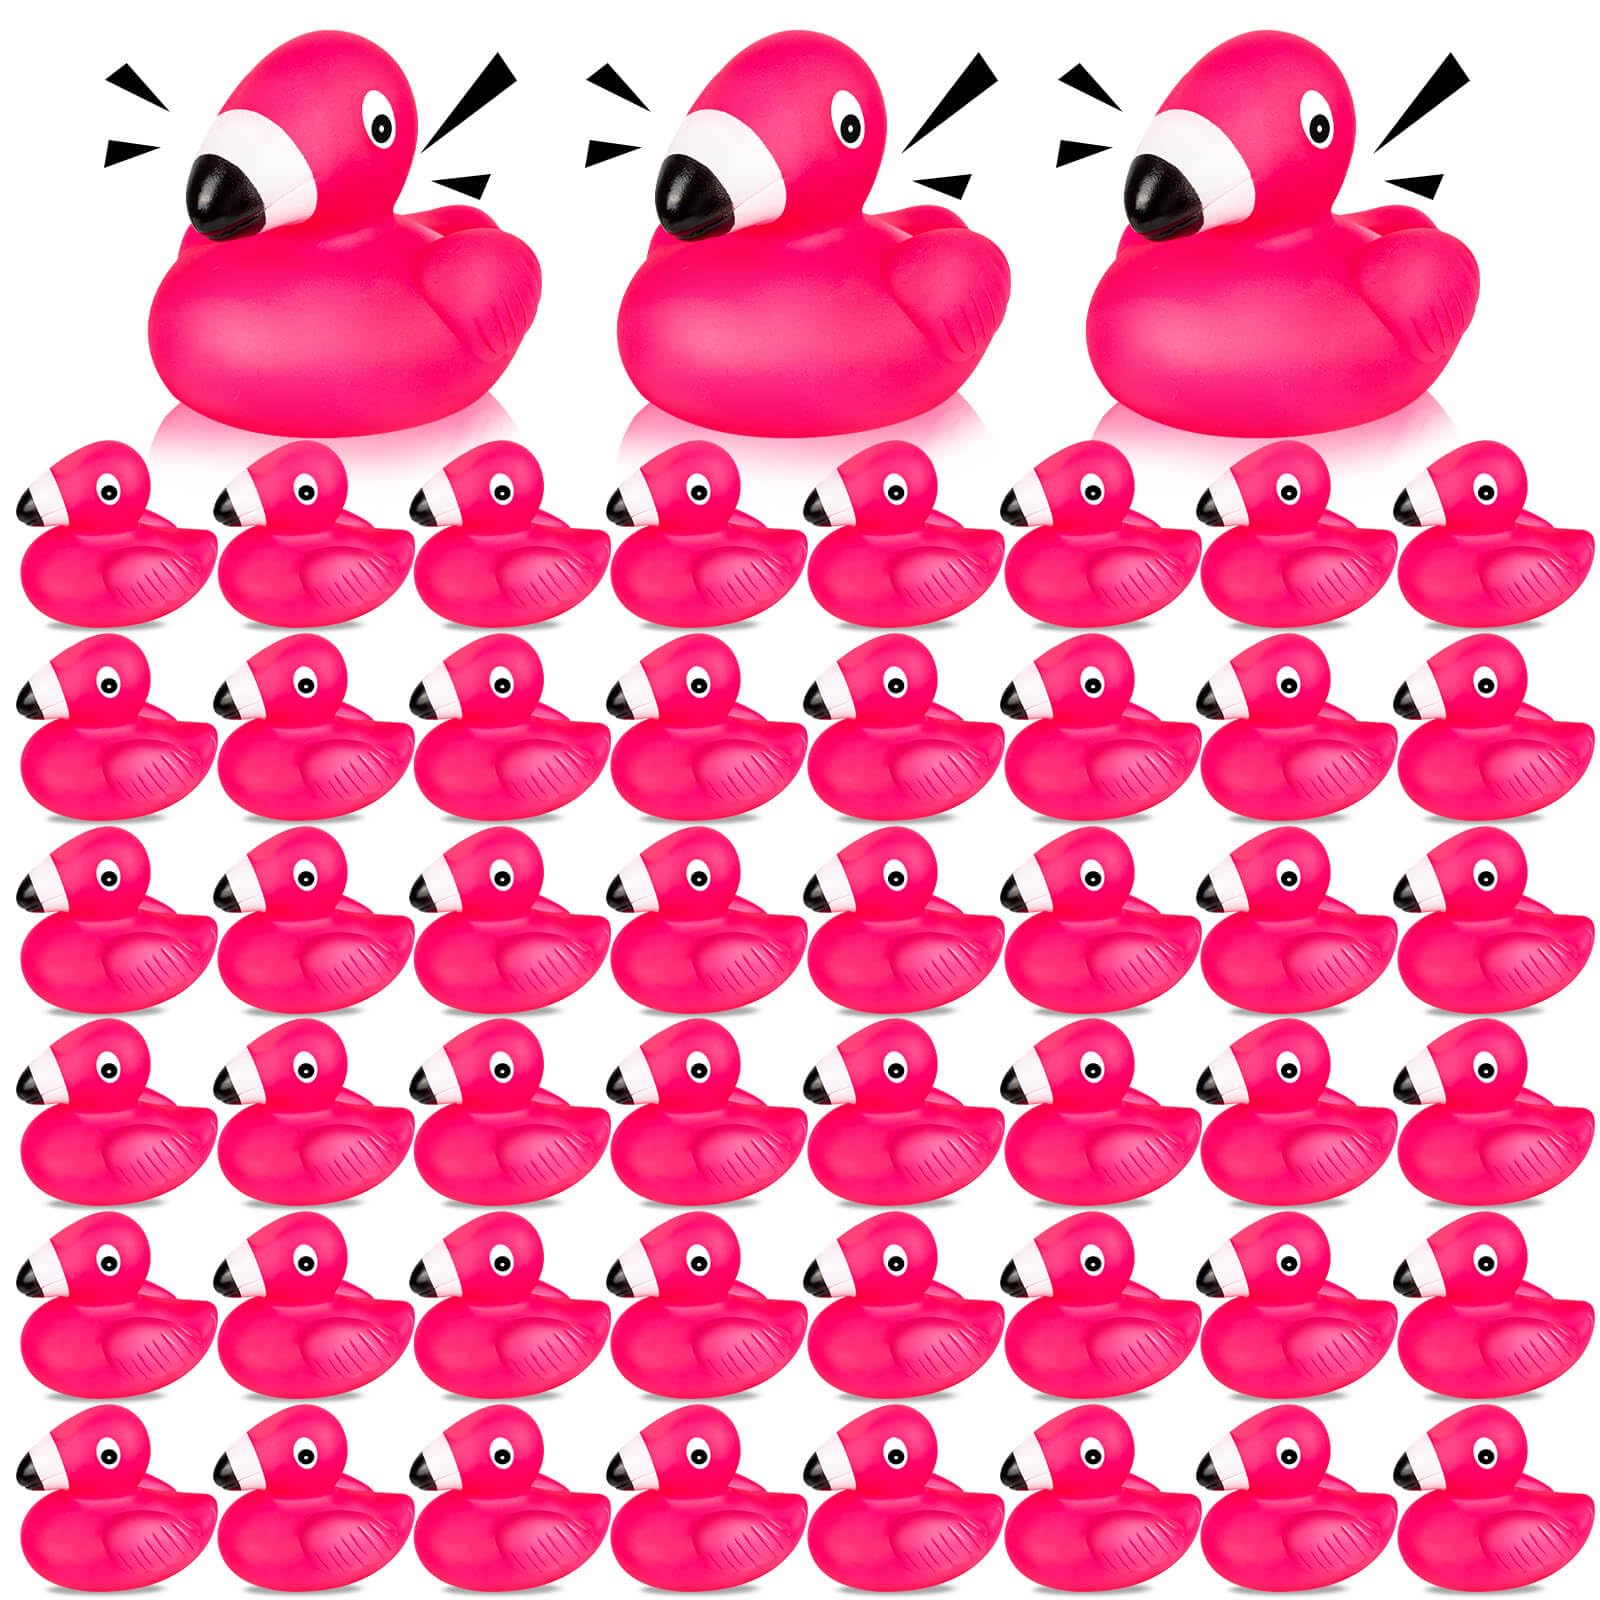 Flamingo Rubber Duckies for Kids, 12PCS Pink Flamingo Duck Bath Toys Cute Floating Squeaky Mini Rubber Ducks for Baby Shower, Cake Decoration, Classroom Carnival Prizes